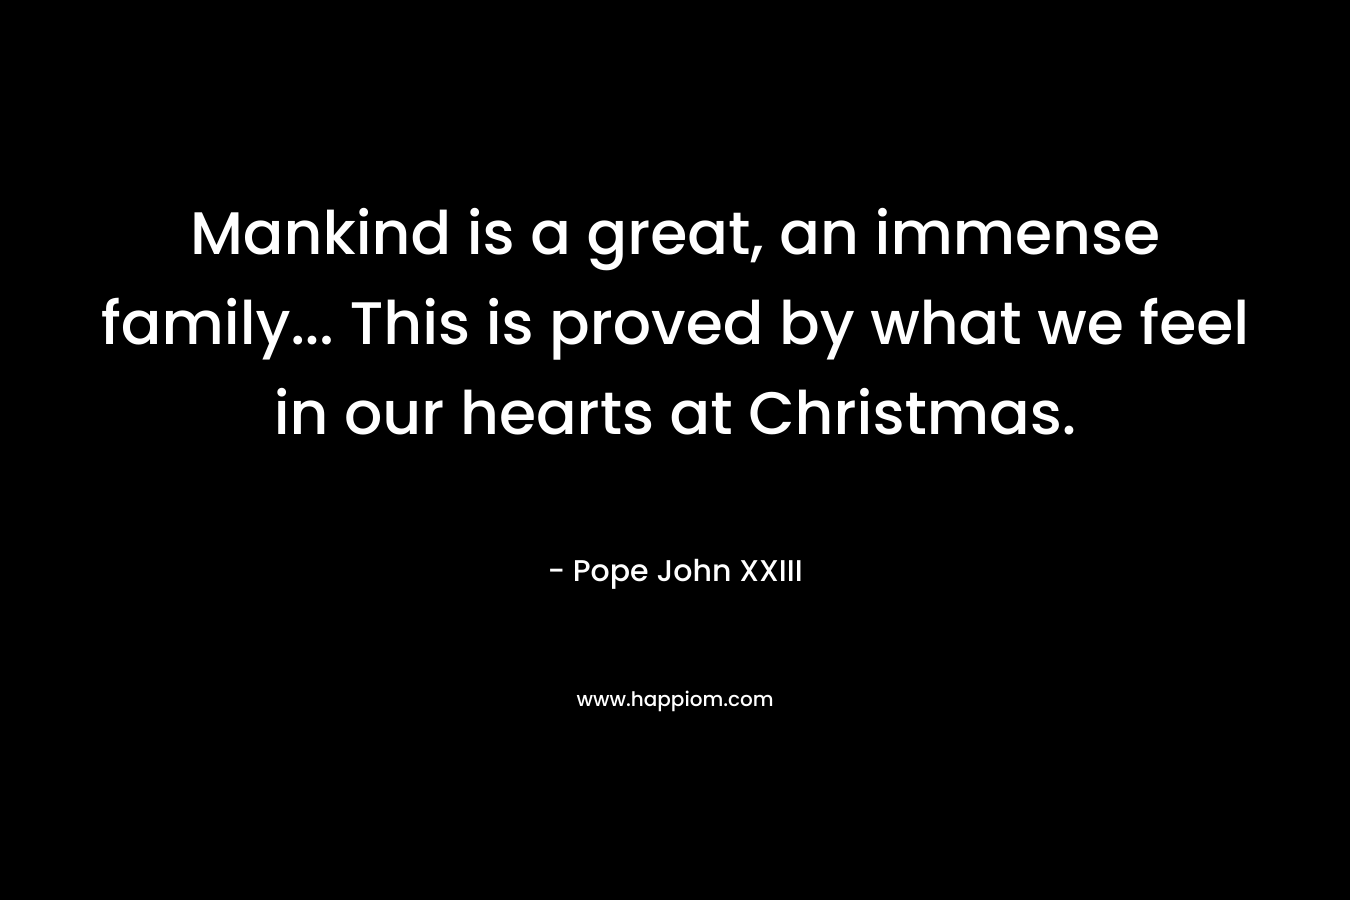 Mankind is a great, an immense family… This is proved by what we feel in our hearts at Christmas. – Pope John XXIII